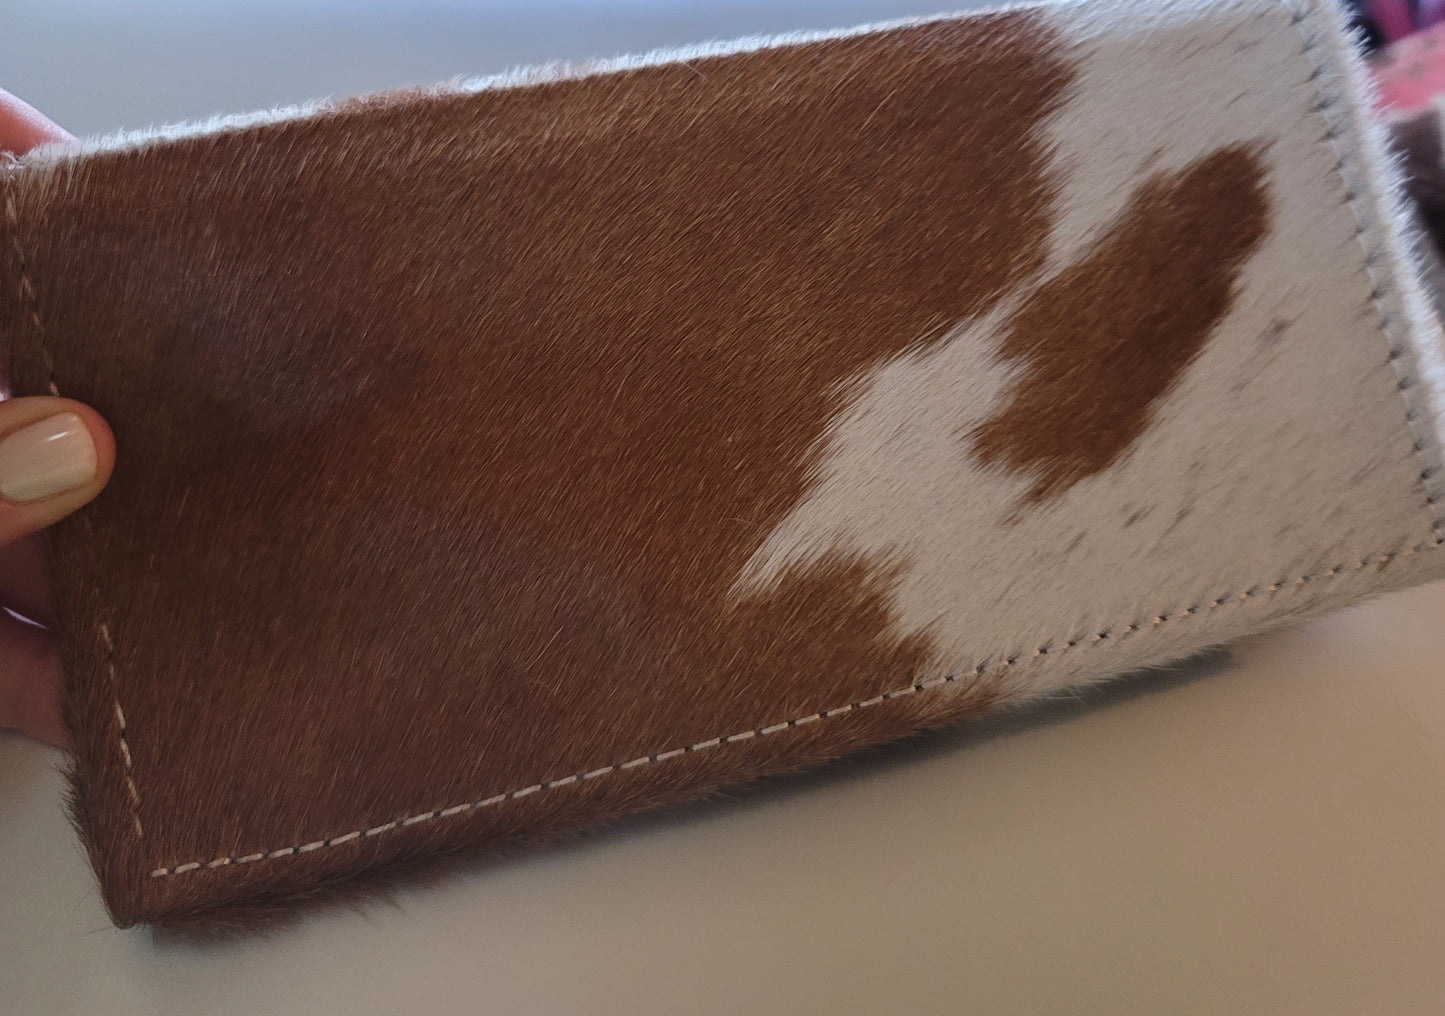 COWHIDE CHECKBOOK HOLDER BY AD